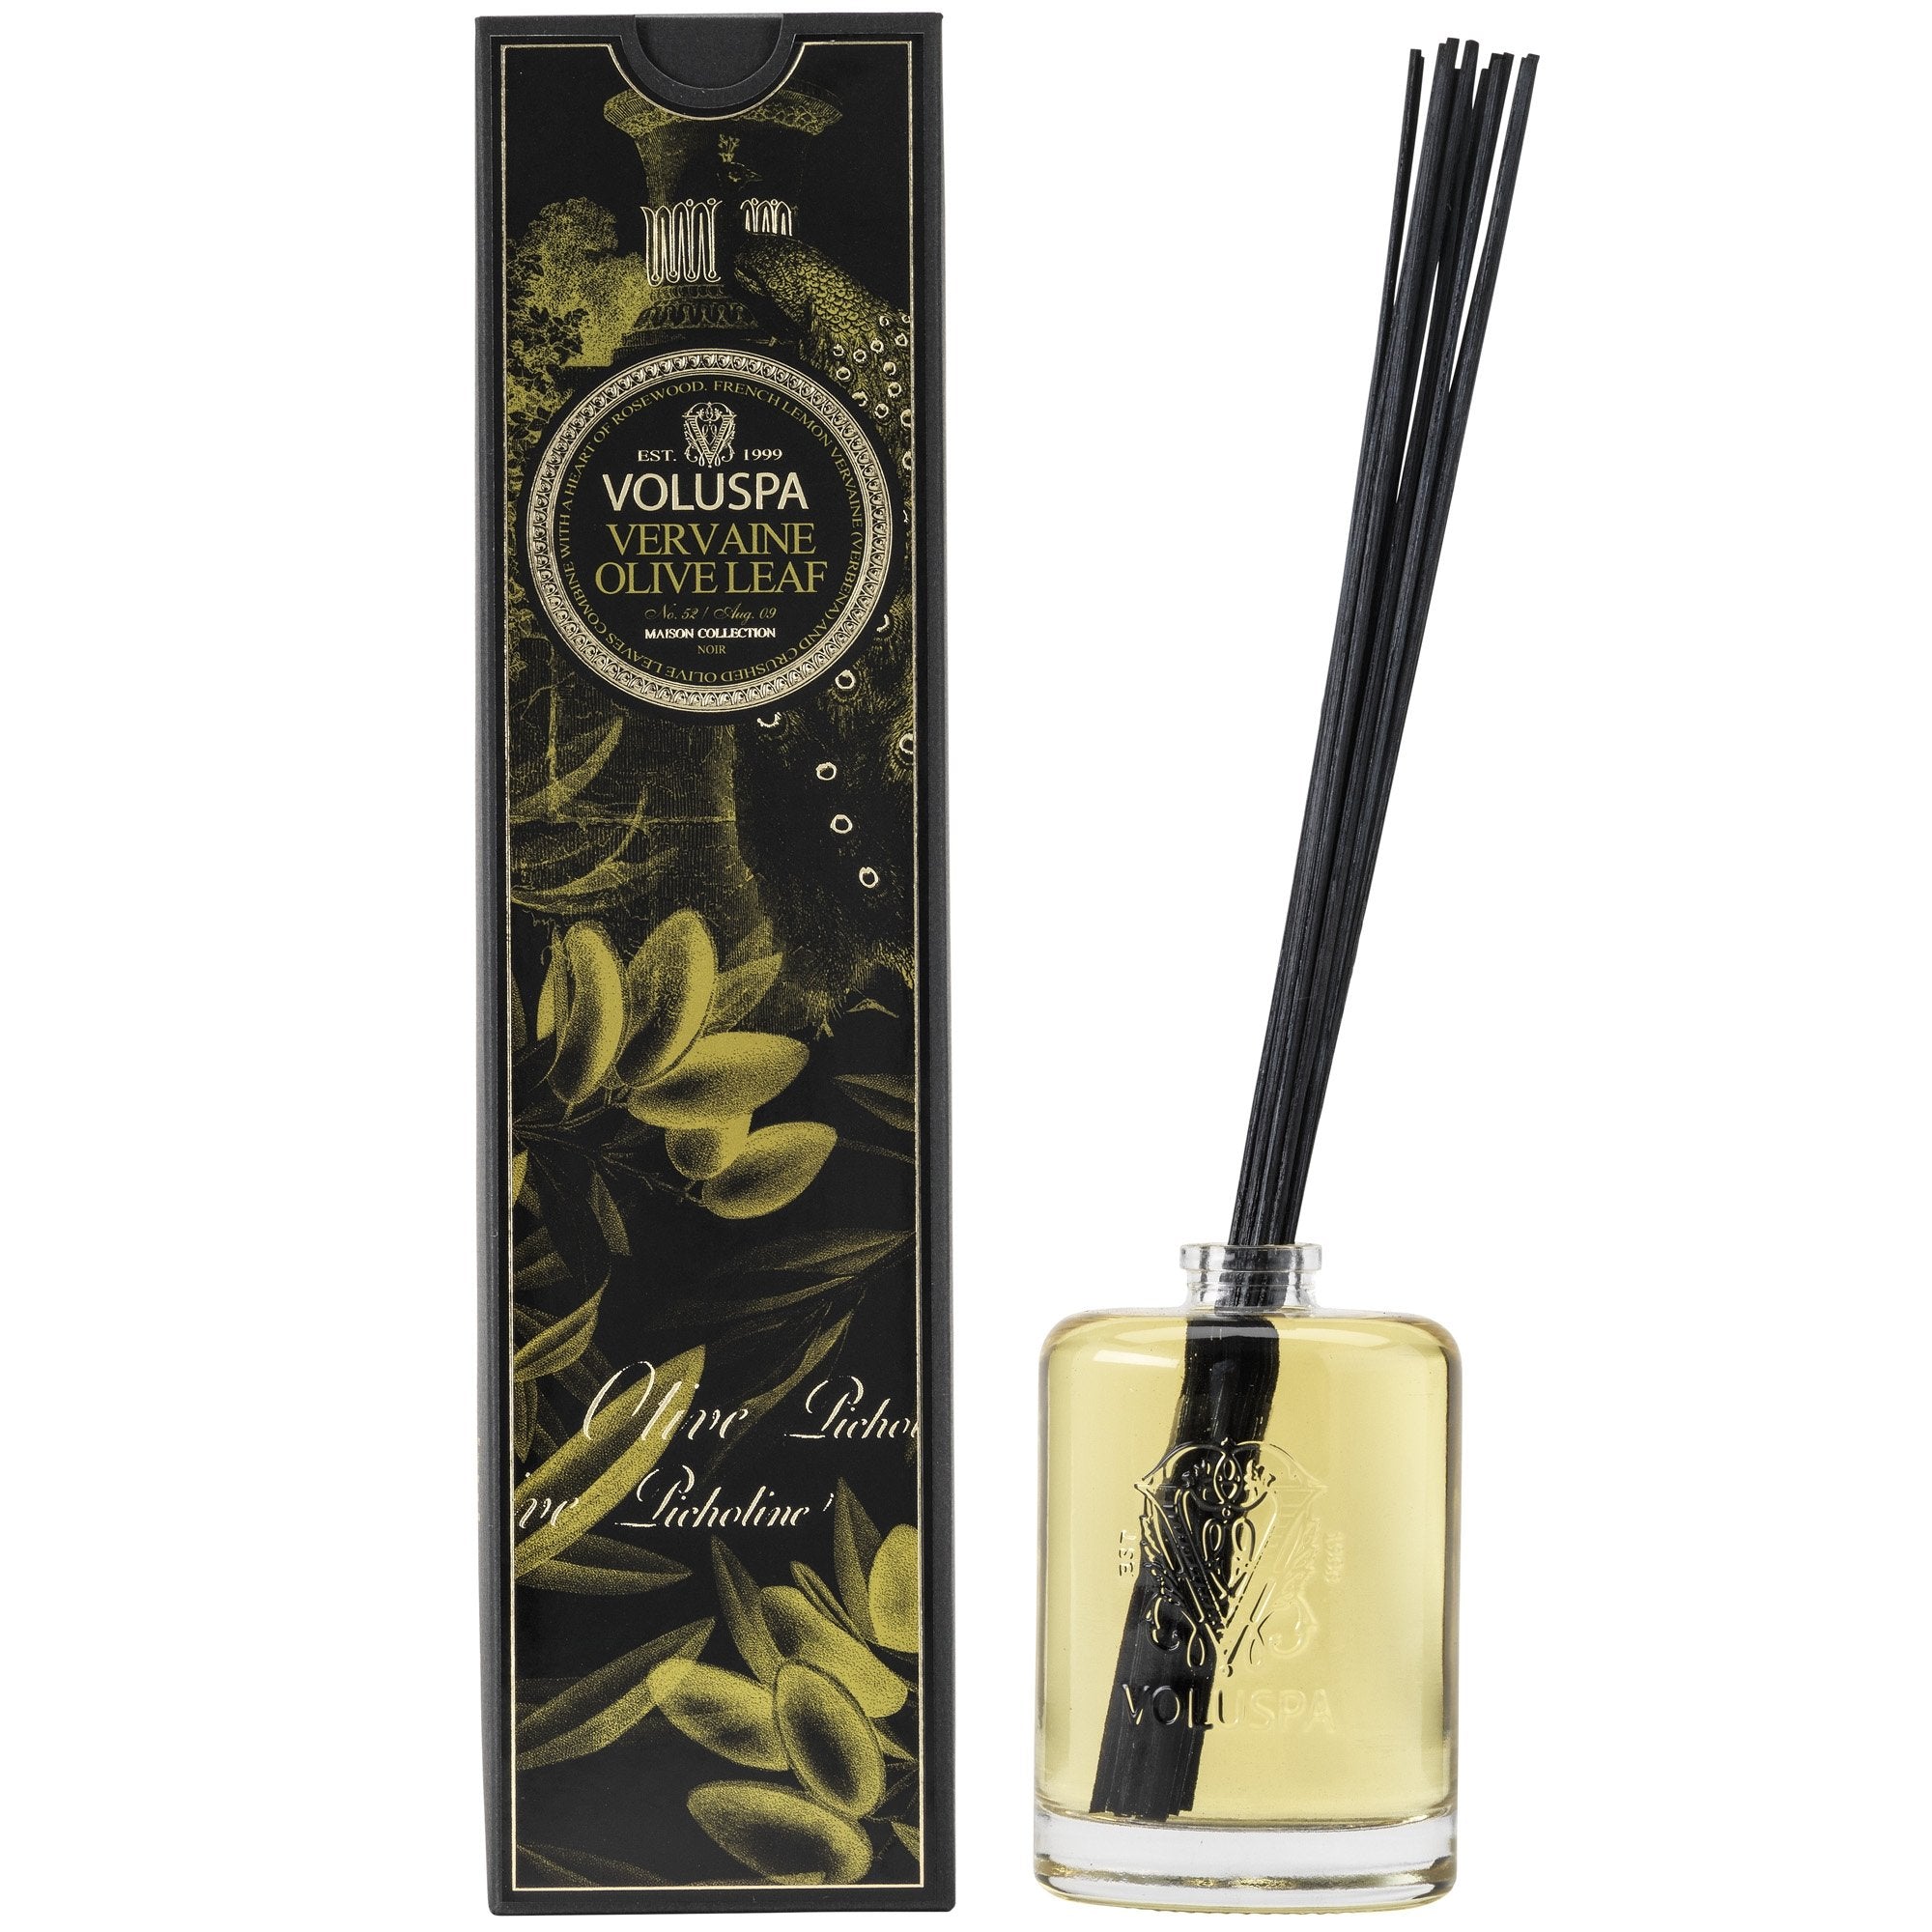 Fragrant Oil Diffuser in Vervaine Olive Leaf design by Voluspa